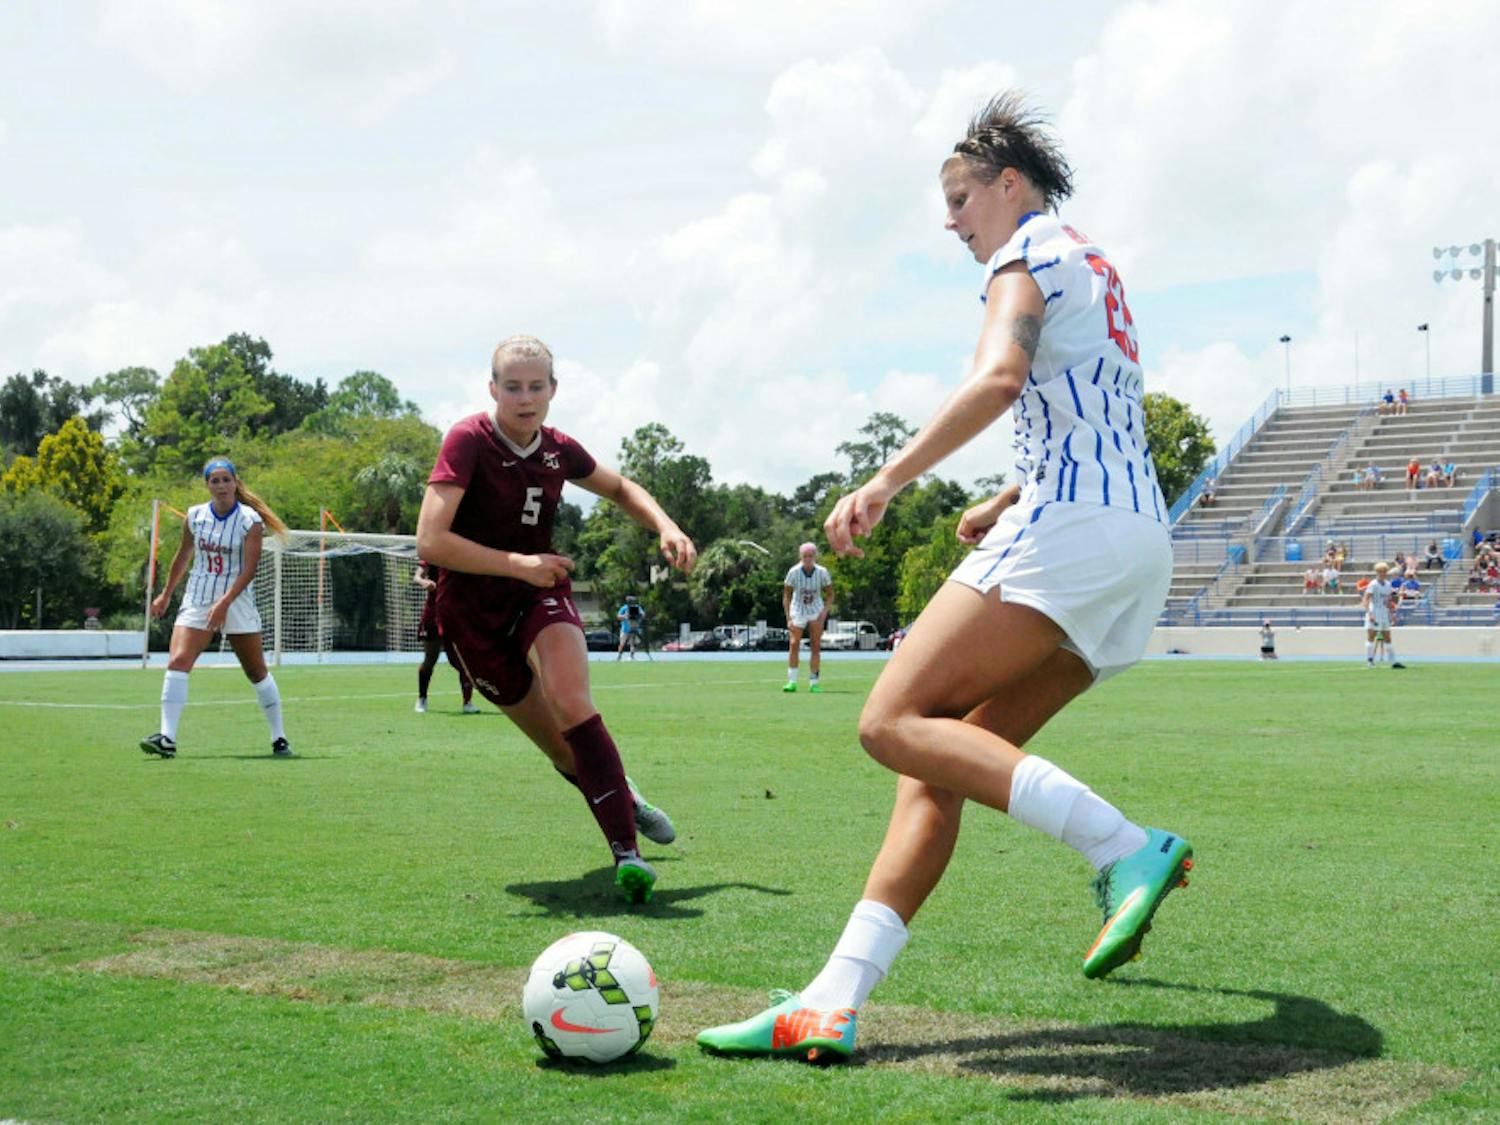 UF midfielder Pamela Begic dribbles the ball while FSU's Elin Jensen (5) approaches during the first half of Florida's 3-2 win against Florida State on Aug. 30, 2015, at James G. Pressly Stadium.